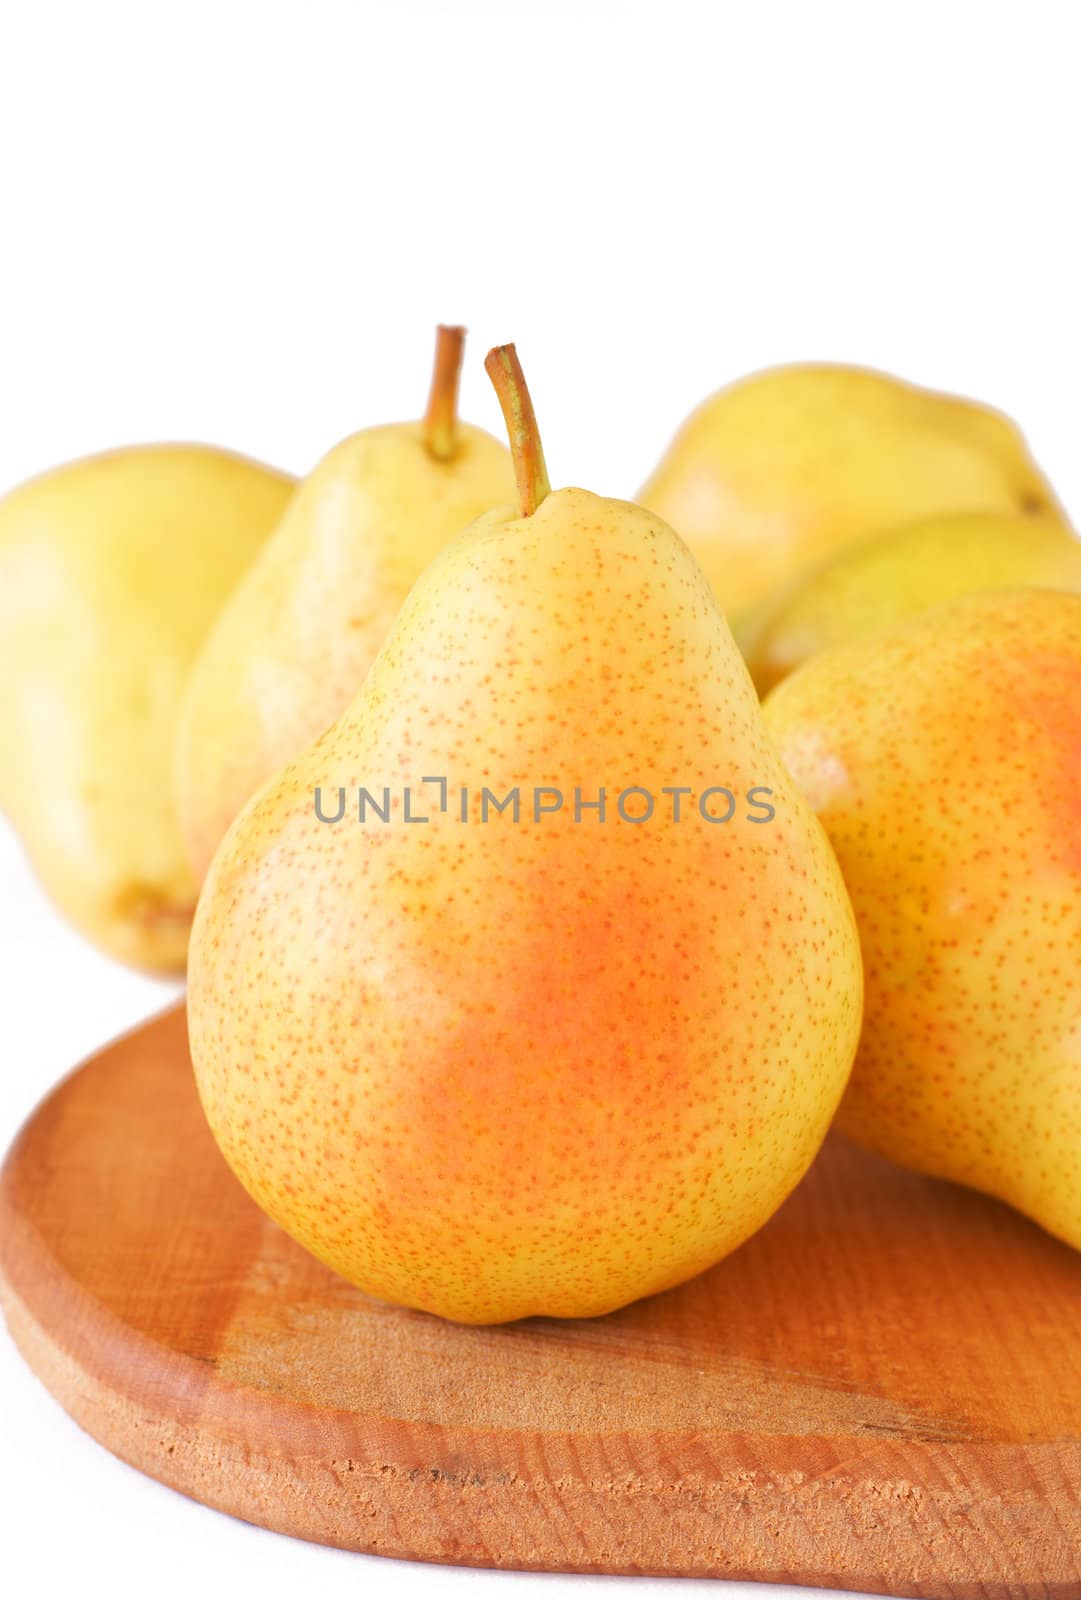 Bunch of ripe yellow pears on white background